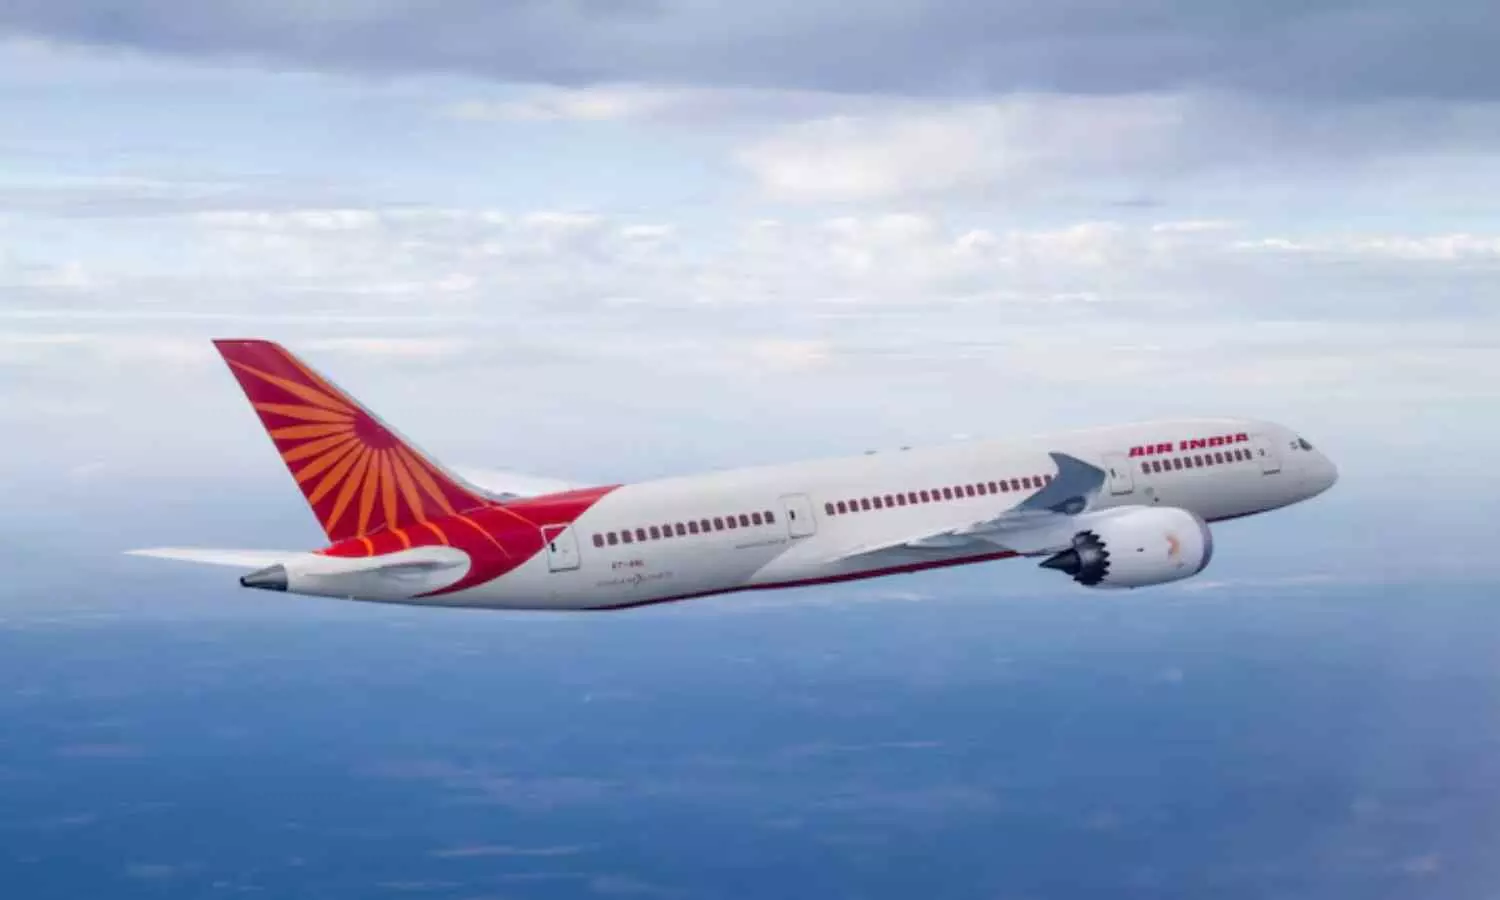 Air India to Introduce A350-900 on Delhi-London route